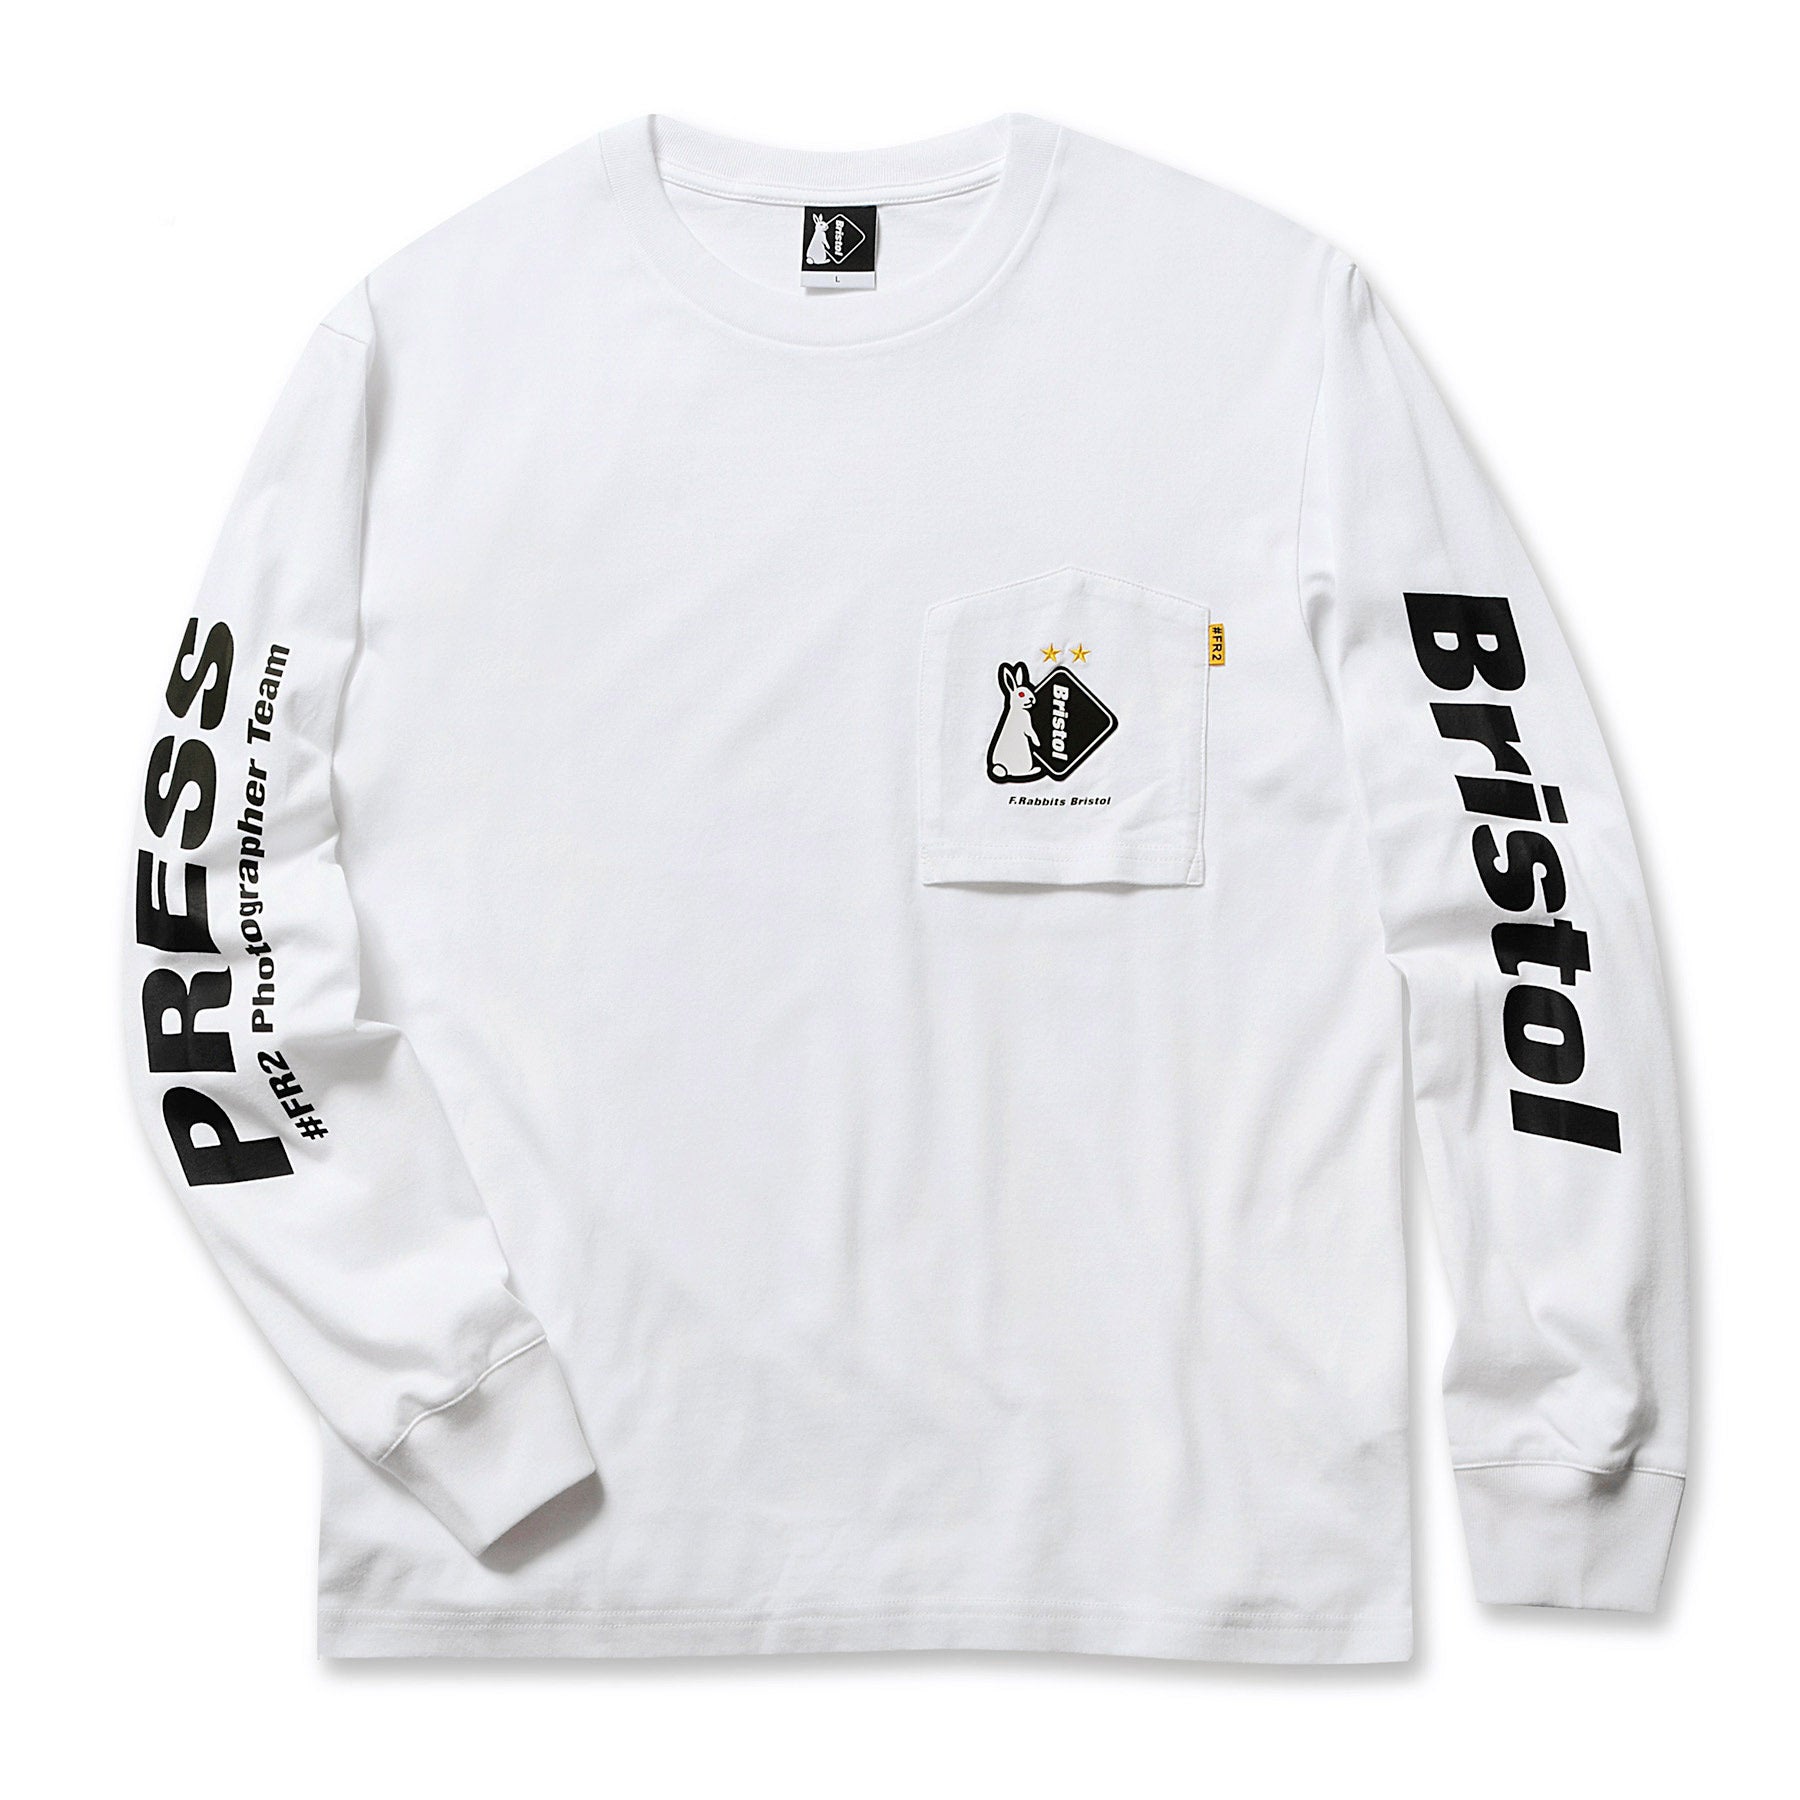 x FCRB L/S Tee FRC1111 White